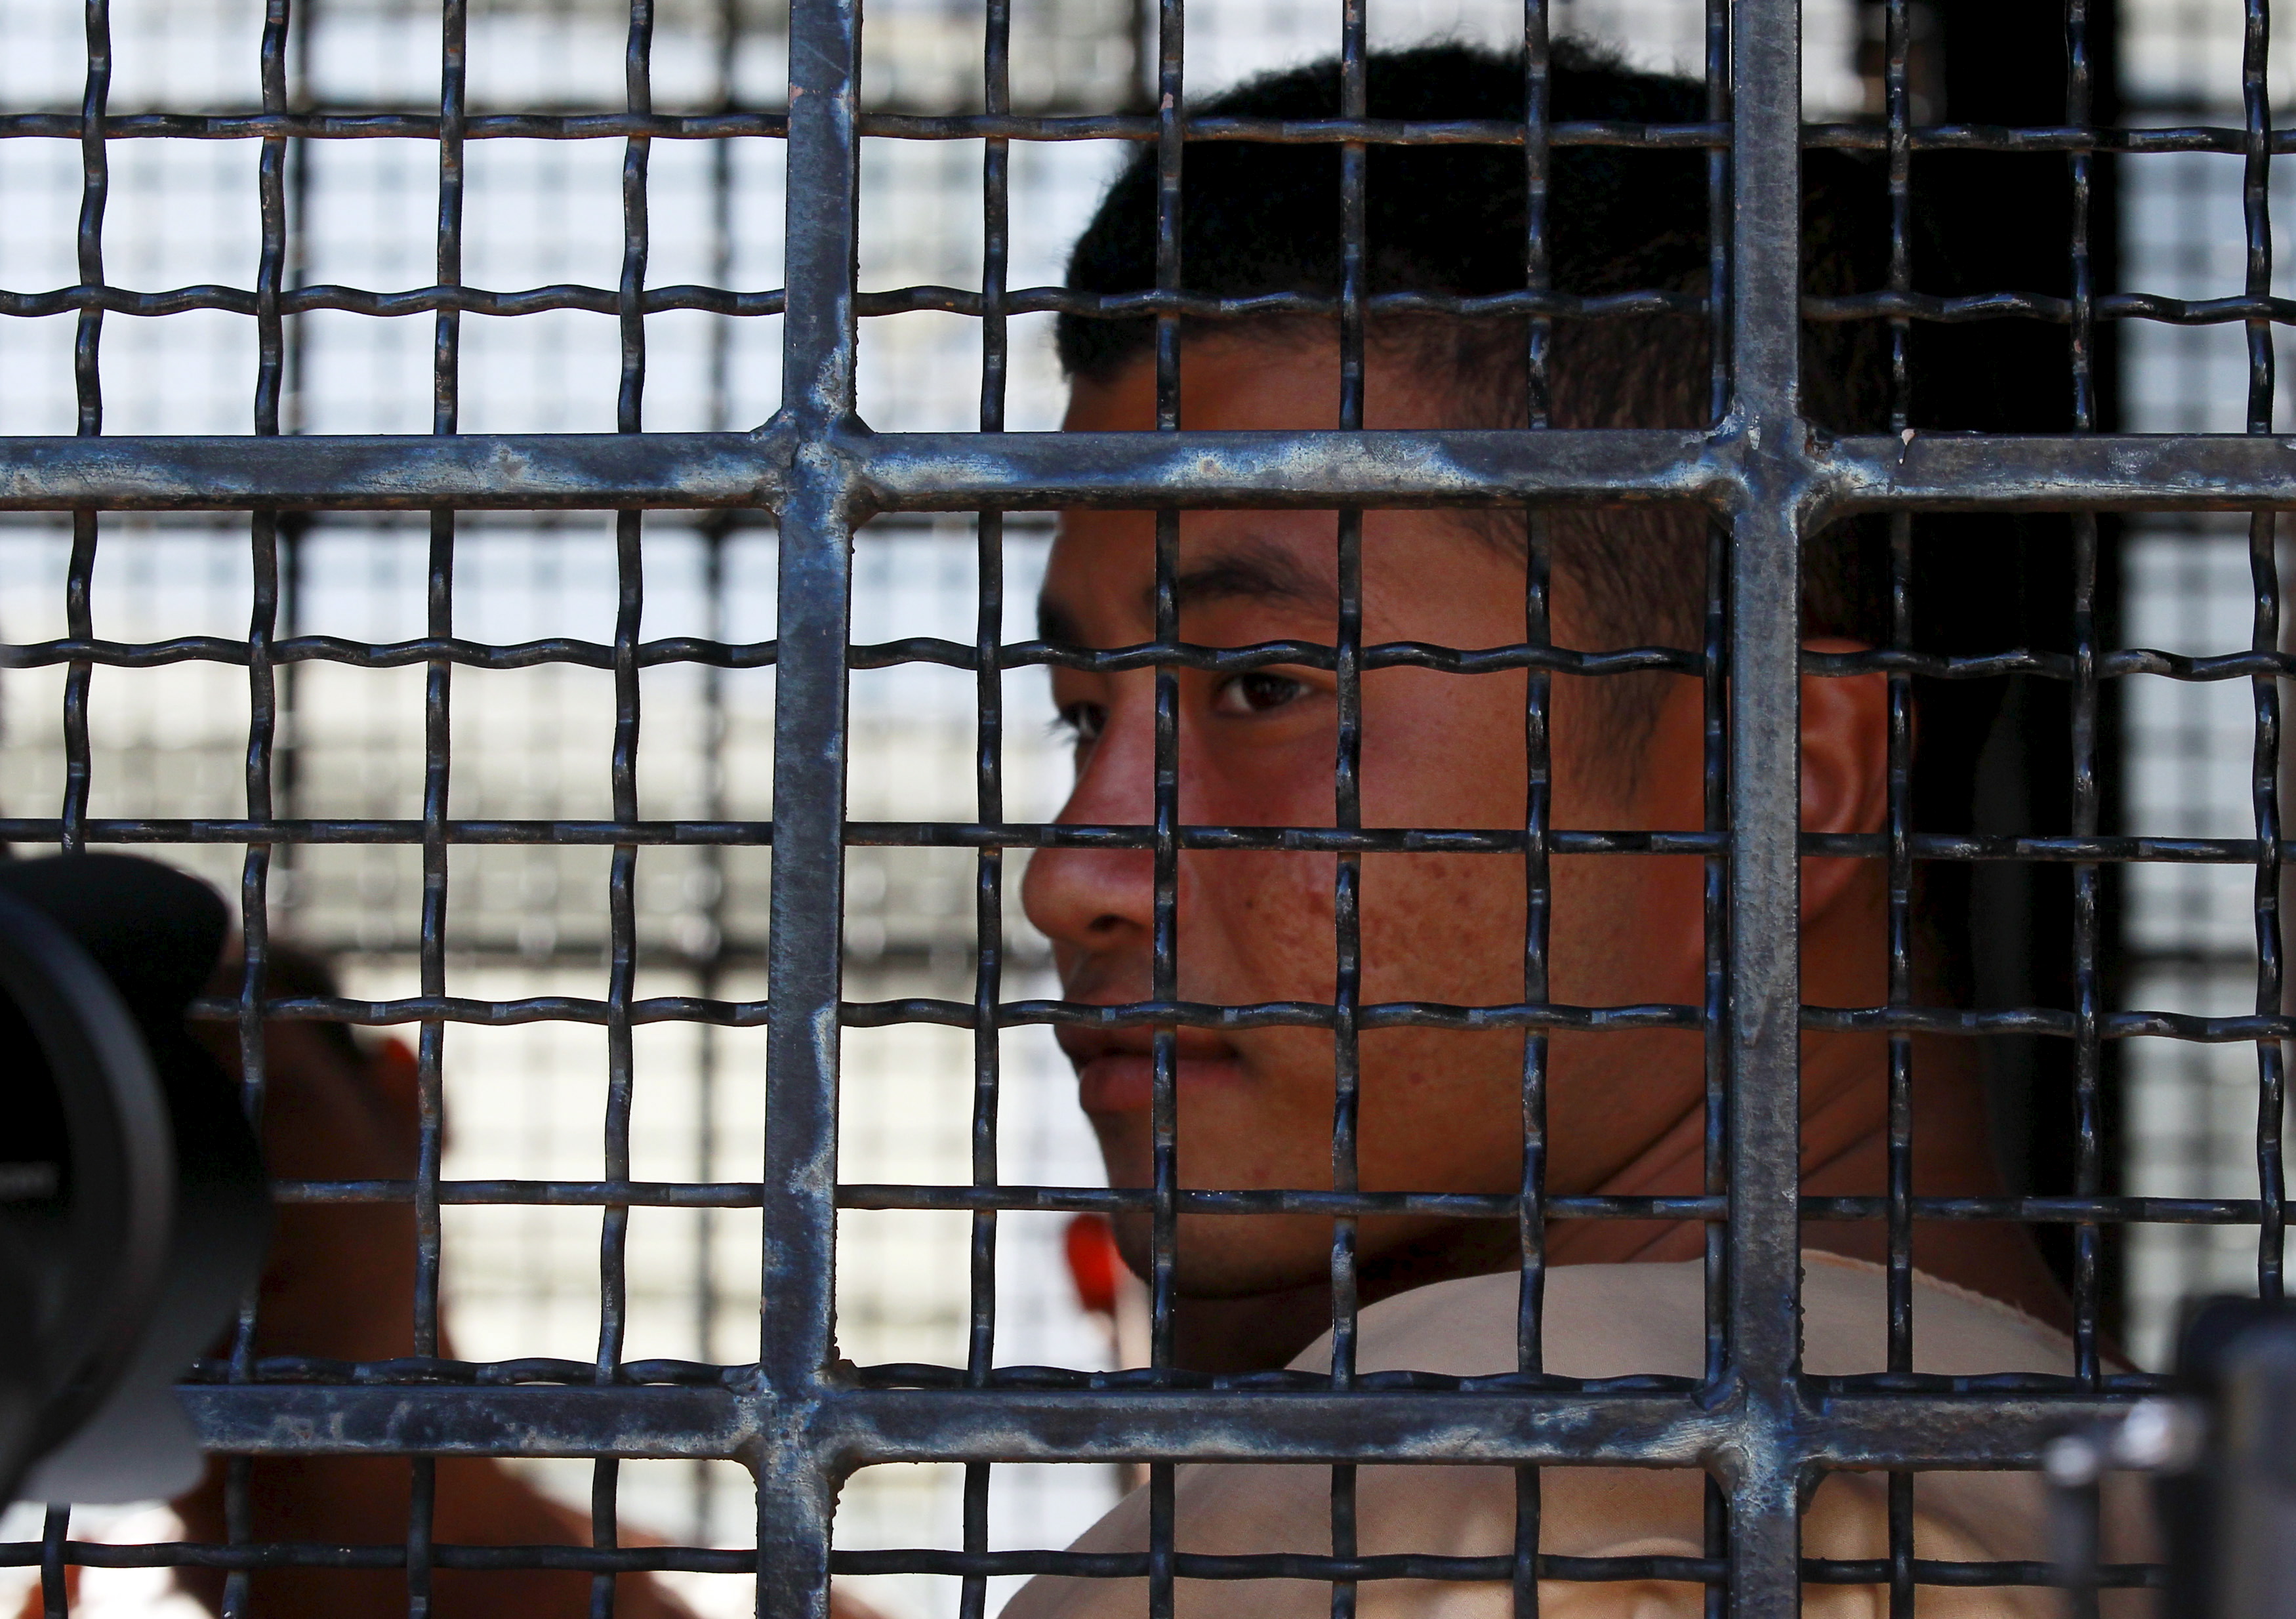 Burmese migrant worker Zaw Lin sits in a prison truck as he arrives at the Koh Samui Provincial Court, in Koh Samui, Thailand, on July 22, 2015 (Chaiwat Subprasom—Reuters)